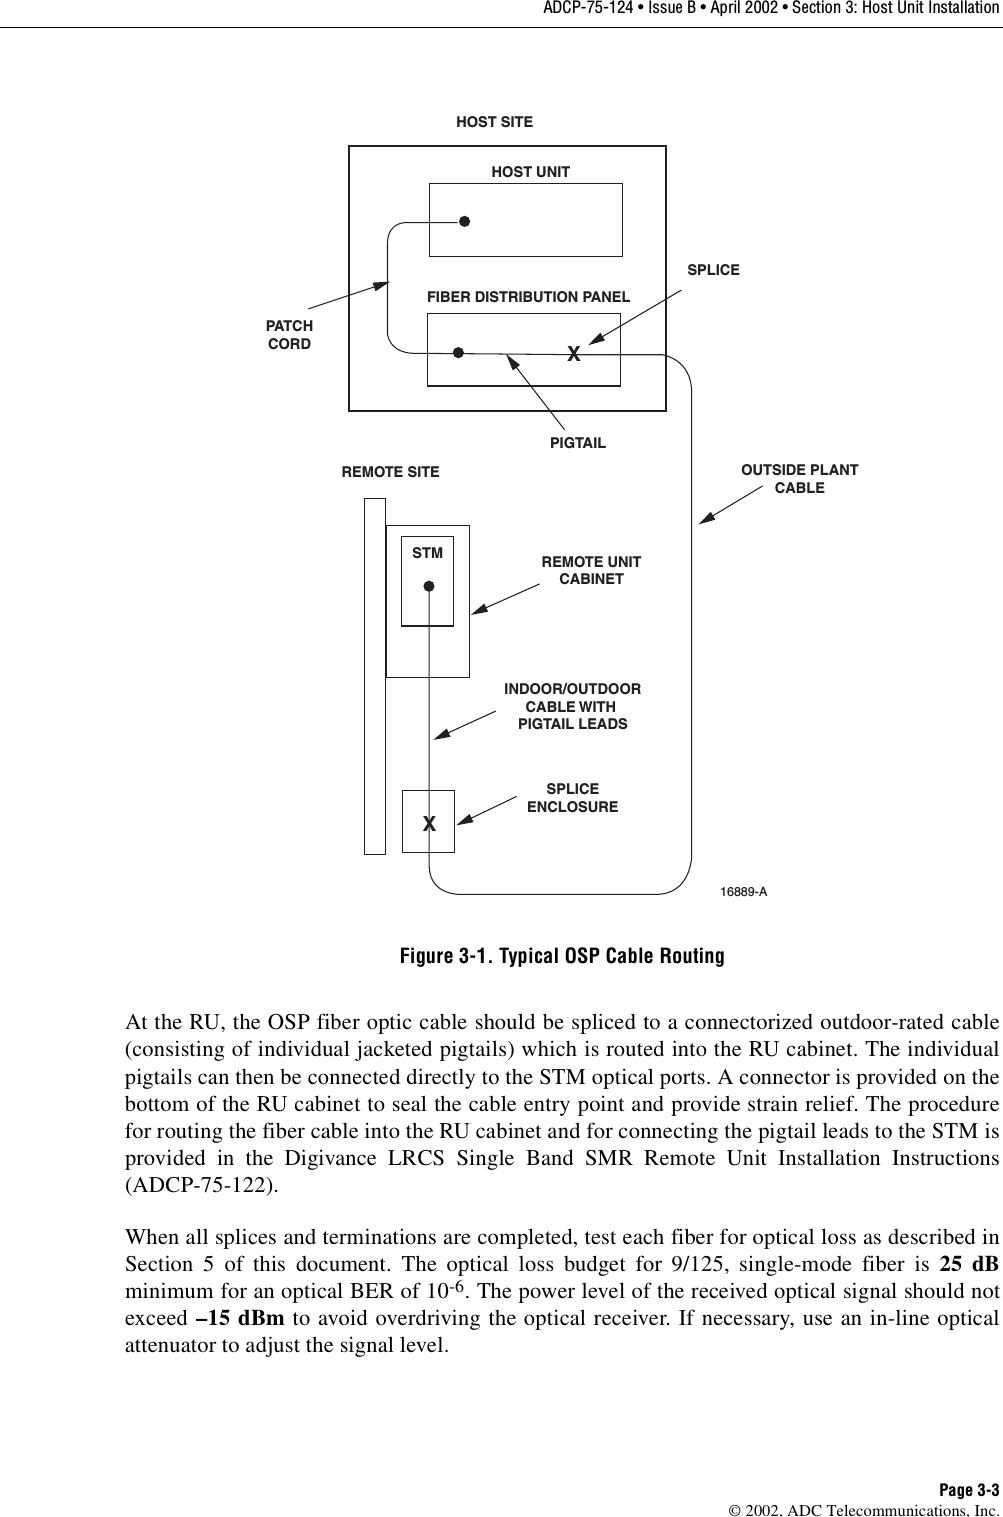 ADCP-75-124 • Issue B • April 2002 • Section 3: Host Unit InstallationPage 3-3©2002, ADC Telecommunications, Inc.Figure 3-1. Typical OSP Cable RoutingAt the RU, the OSP fiber optic cable should be spliced to aconnectorized outdoor-rated cable(consisting of individual jacketed pigtails) which is routed into the RU cabinet. The individualpigtails can then be connected directly to the STM optical ports. Aconnector is provided on thebottom of the RU cabinet to seal the cable entry point and provide strain relief. The procedurefor routing the fiber cable into the RU cabinet and for connecting the pigtail leads to the STM isprovided in the Digivance LRCS Single Band SMR Remote Unit Installation Instructions(ADCP-75-122).When all splices and terminations are completed, test each fiber for optical loss as described inSection 5 of this document. The optical loss budget for 9/125, single-mode fiber is 25 dBminimum for an optical BER of 10-6.The power level of the received optical signal should notexceed –15 dBm to avoid overdriving the optical receiver. If necessary, use an in-line opticalattenuator to adjust the signal level.HOST UNITFIBER DISTRIBUTION PANELXXSTMREMOTE SITEHOST SITEPATCHCORDSPLICEPIGTAILSPLICEENCLOSUREINDOOR/OUTDOORCABLE WITH PIGTAIL LEADSOUTSIDE PLANTCABLEREMOTE UNITCABINET16889-A